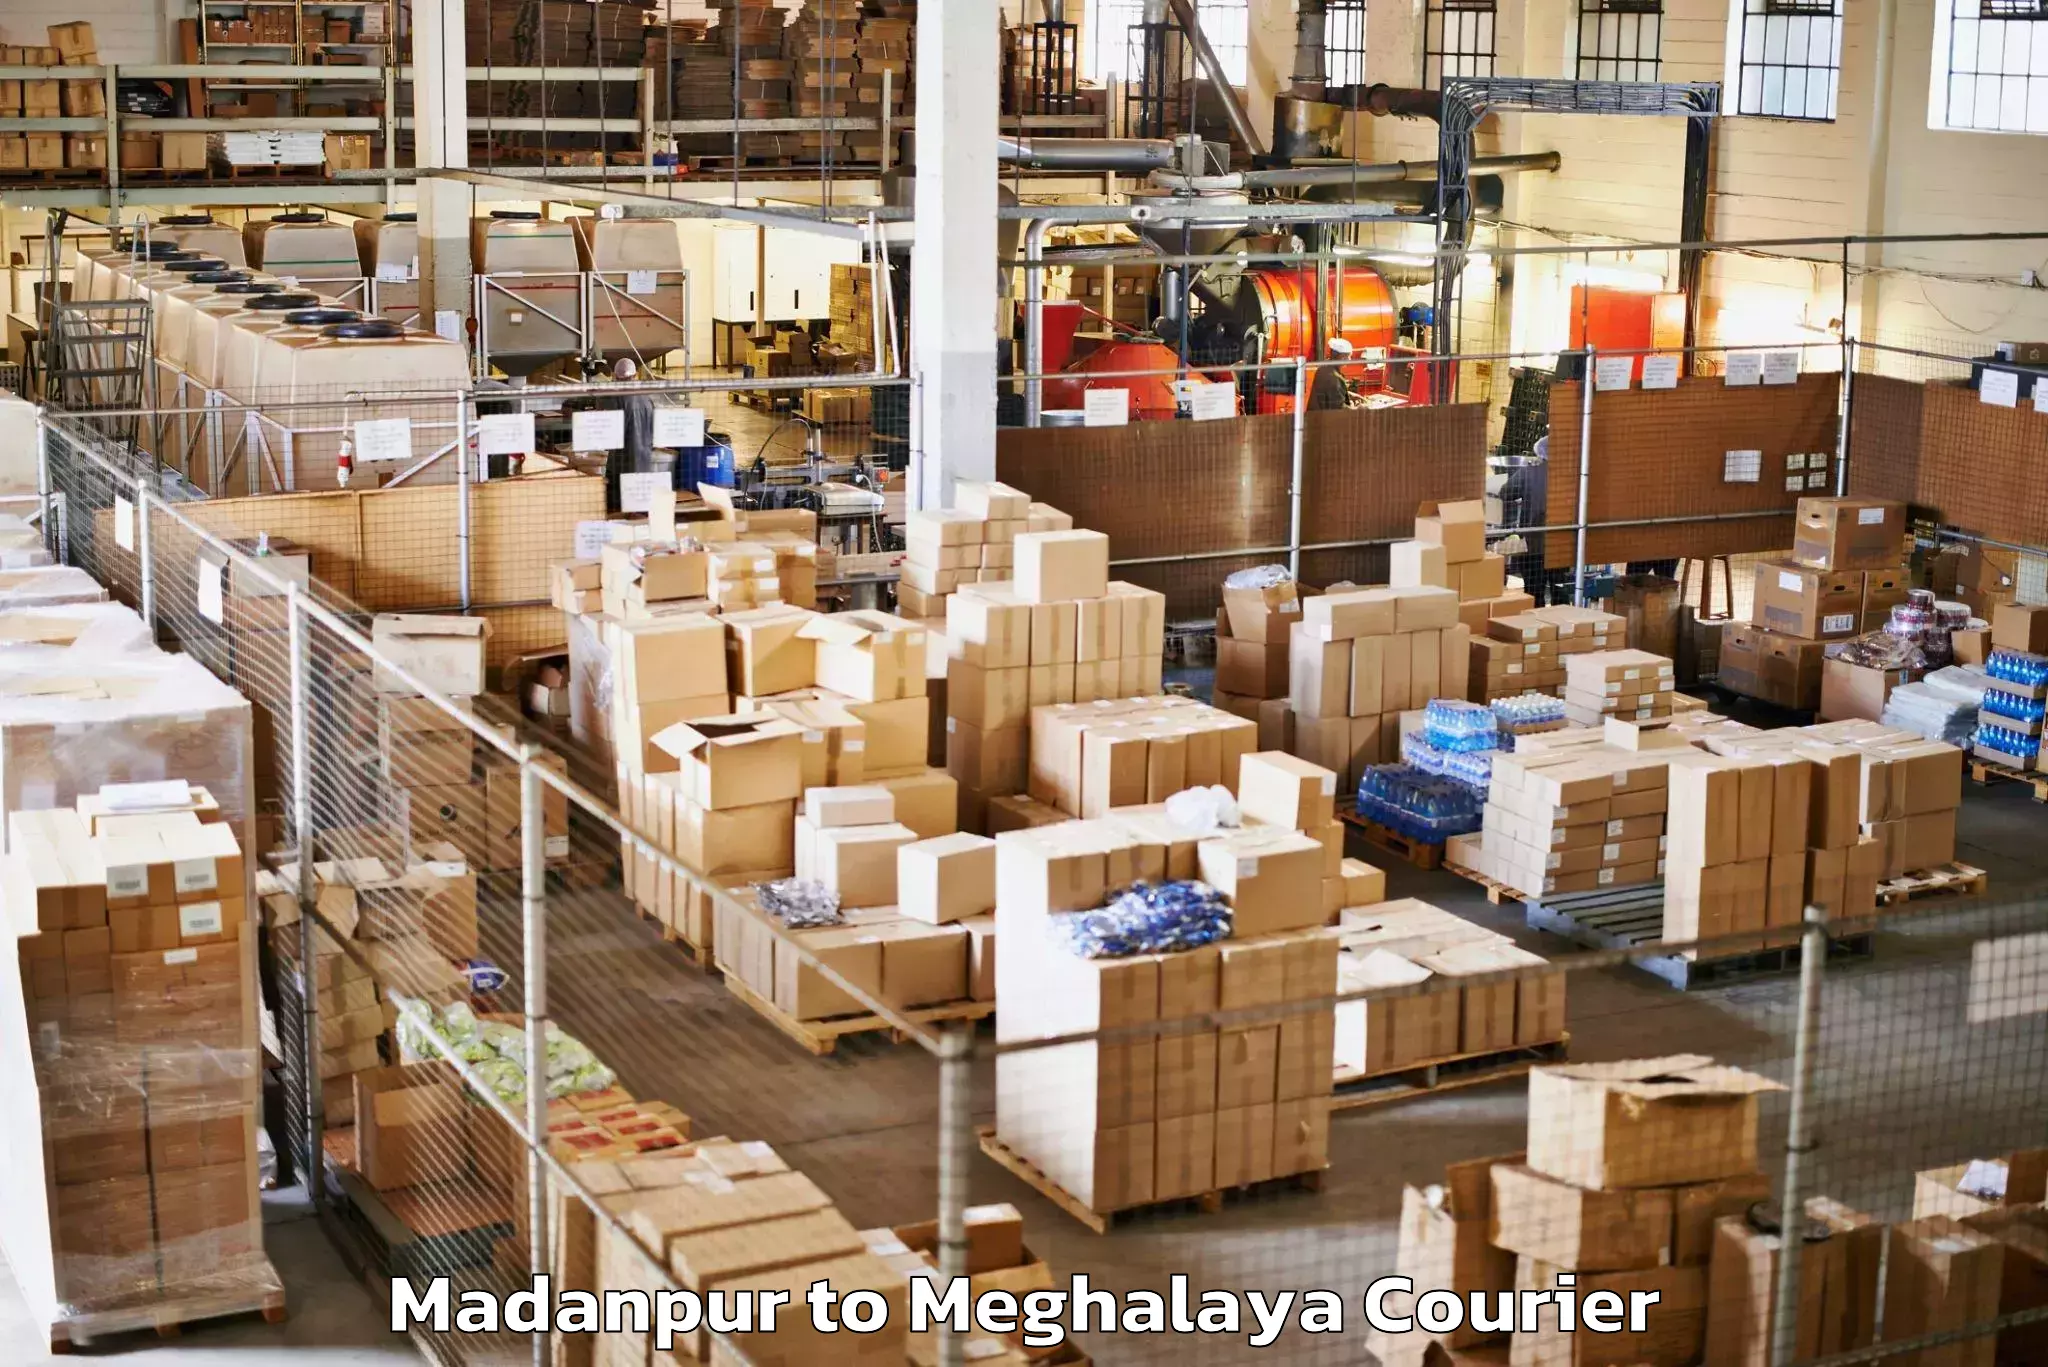 High-quality baggage shipment in Madanpur to Shillong